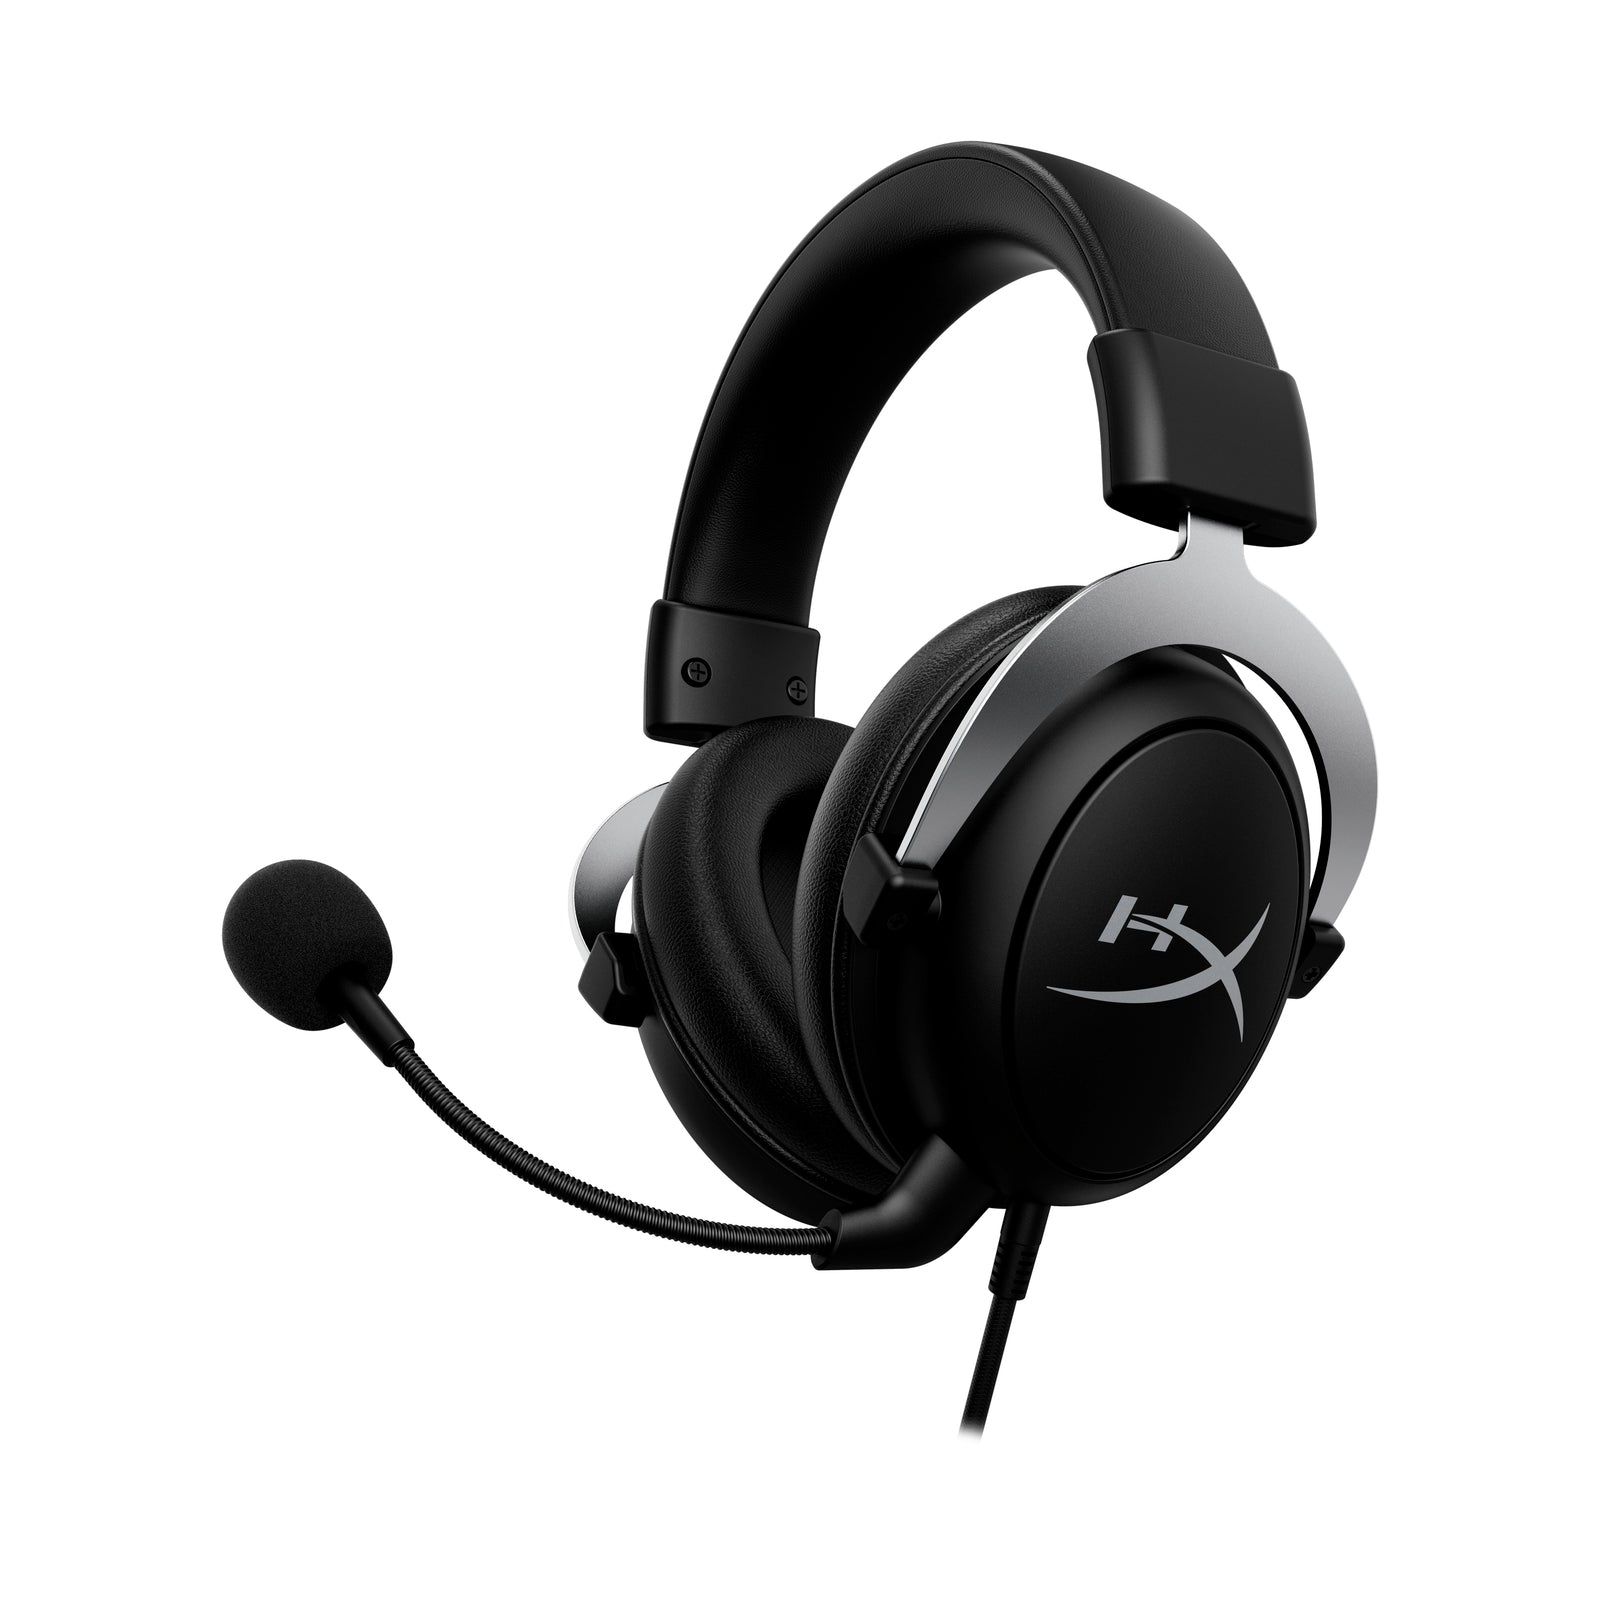 HyperX CloudX - Gaming Headset for Xbox - Black-Silver